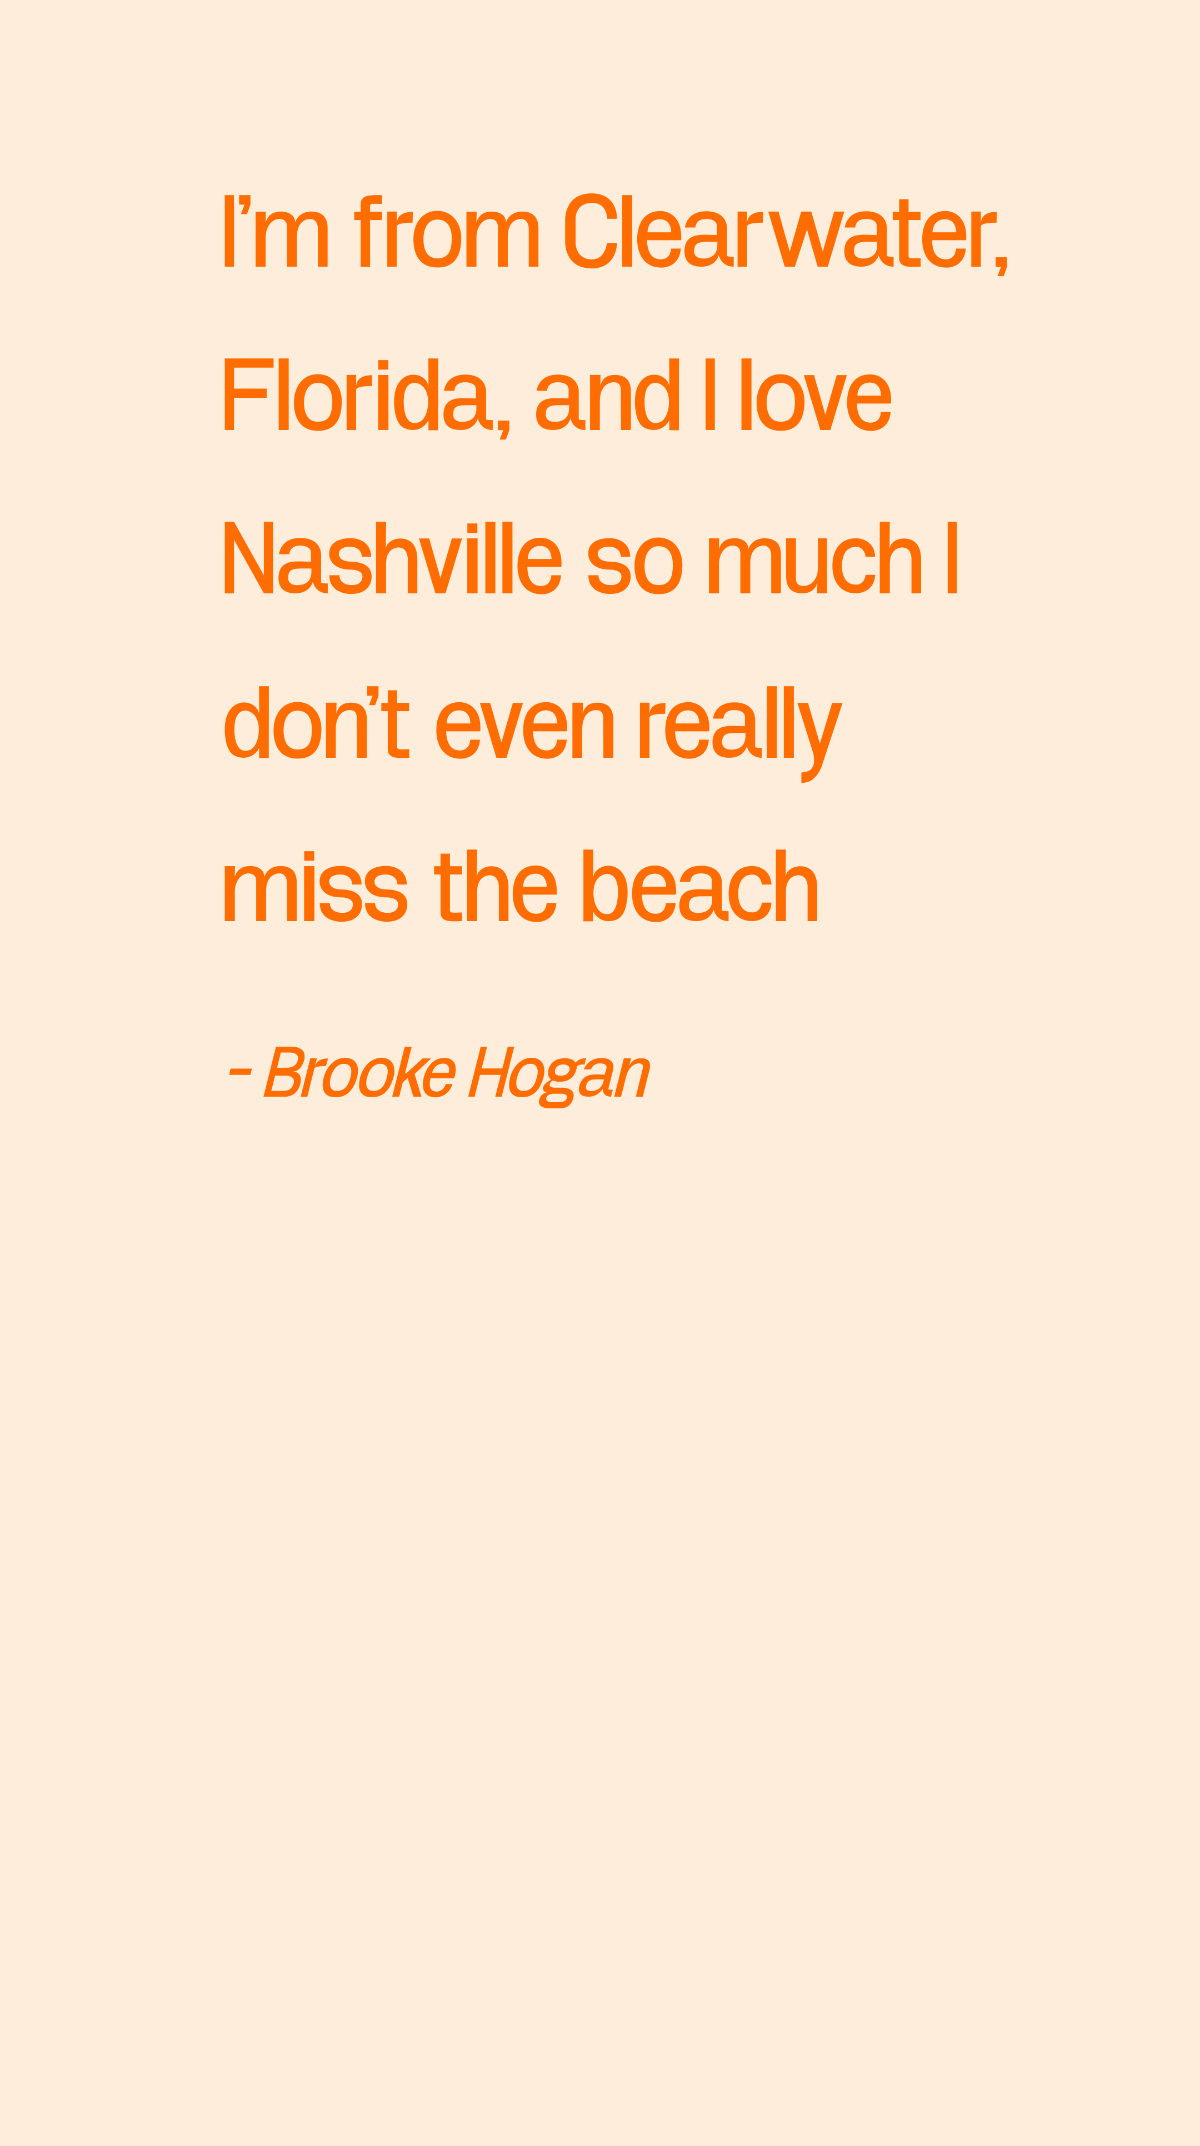 Free Brooke Hogan - I'm from Clearwater, Florida, and I love Nashville so much I don't even really miss the beach Template